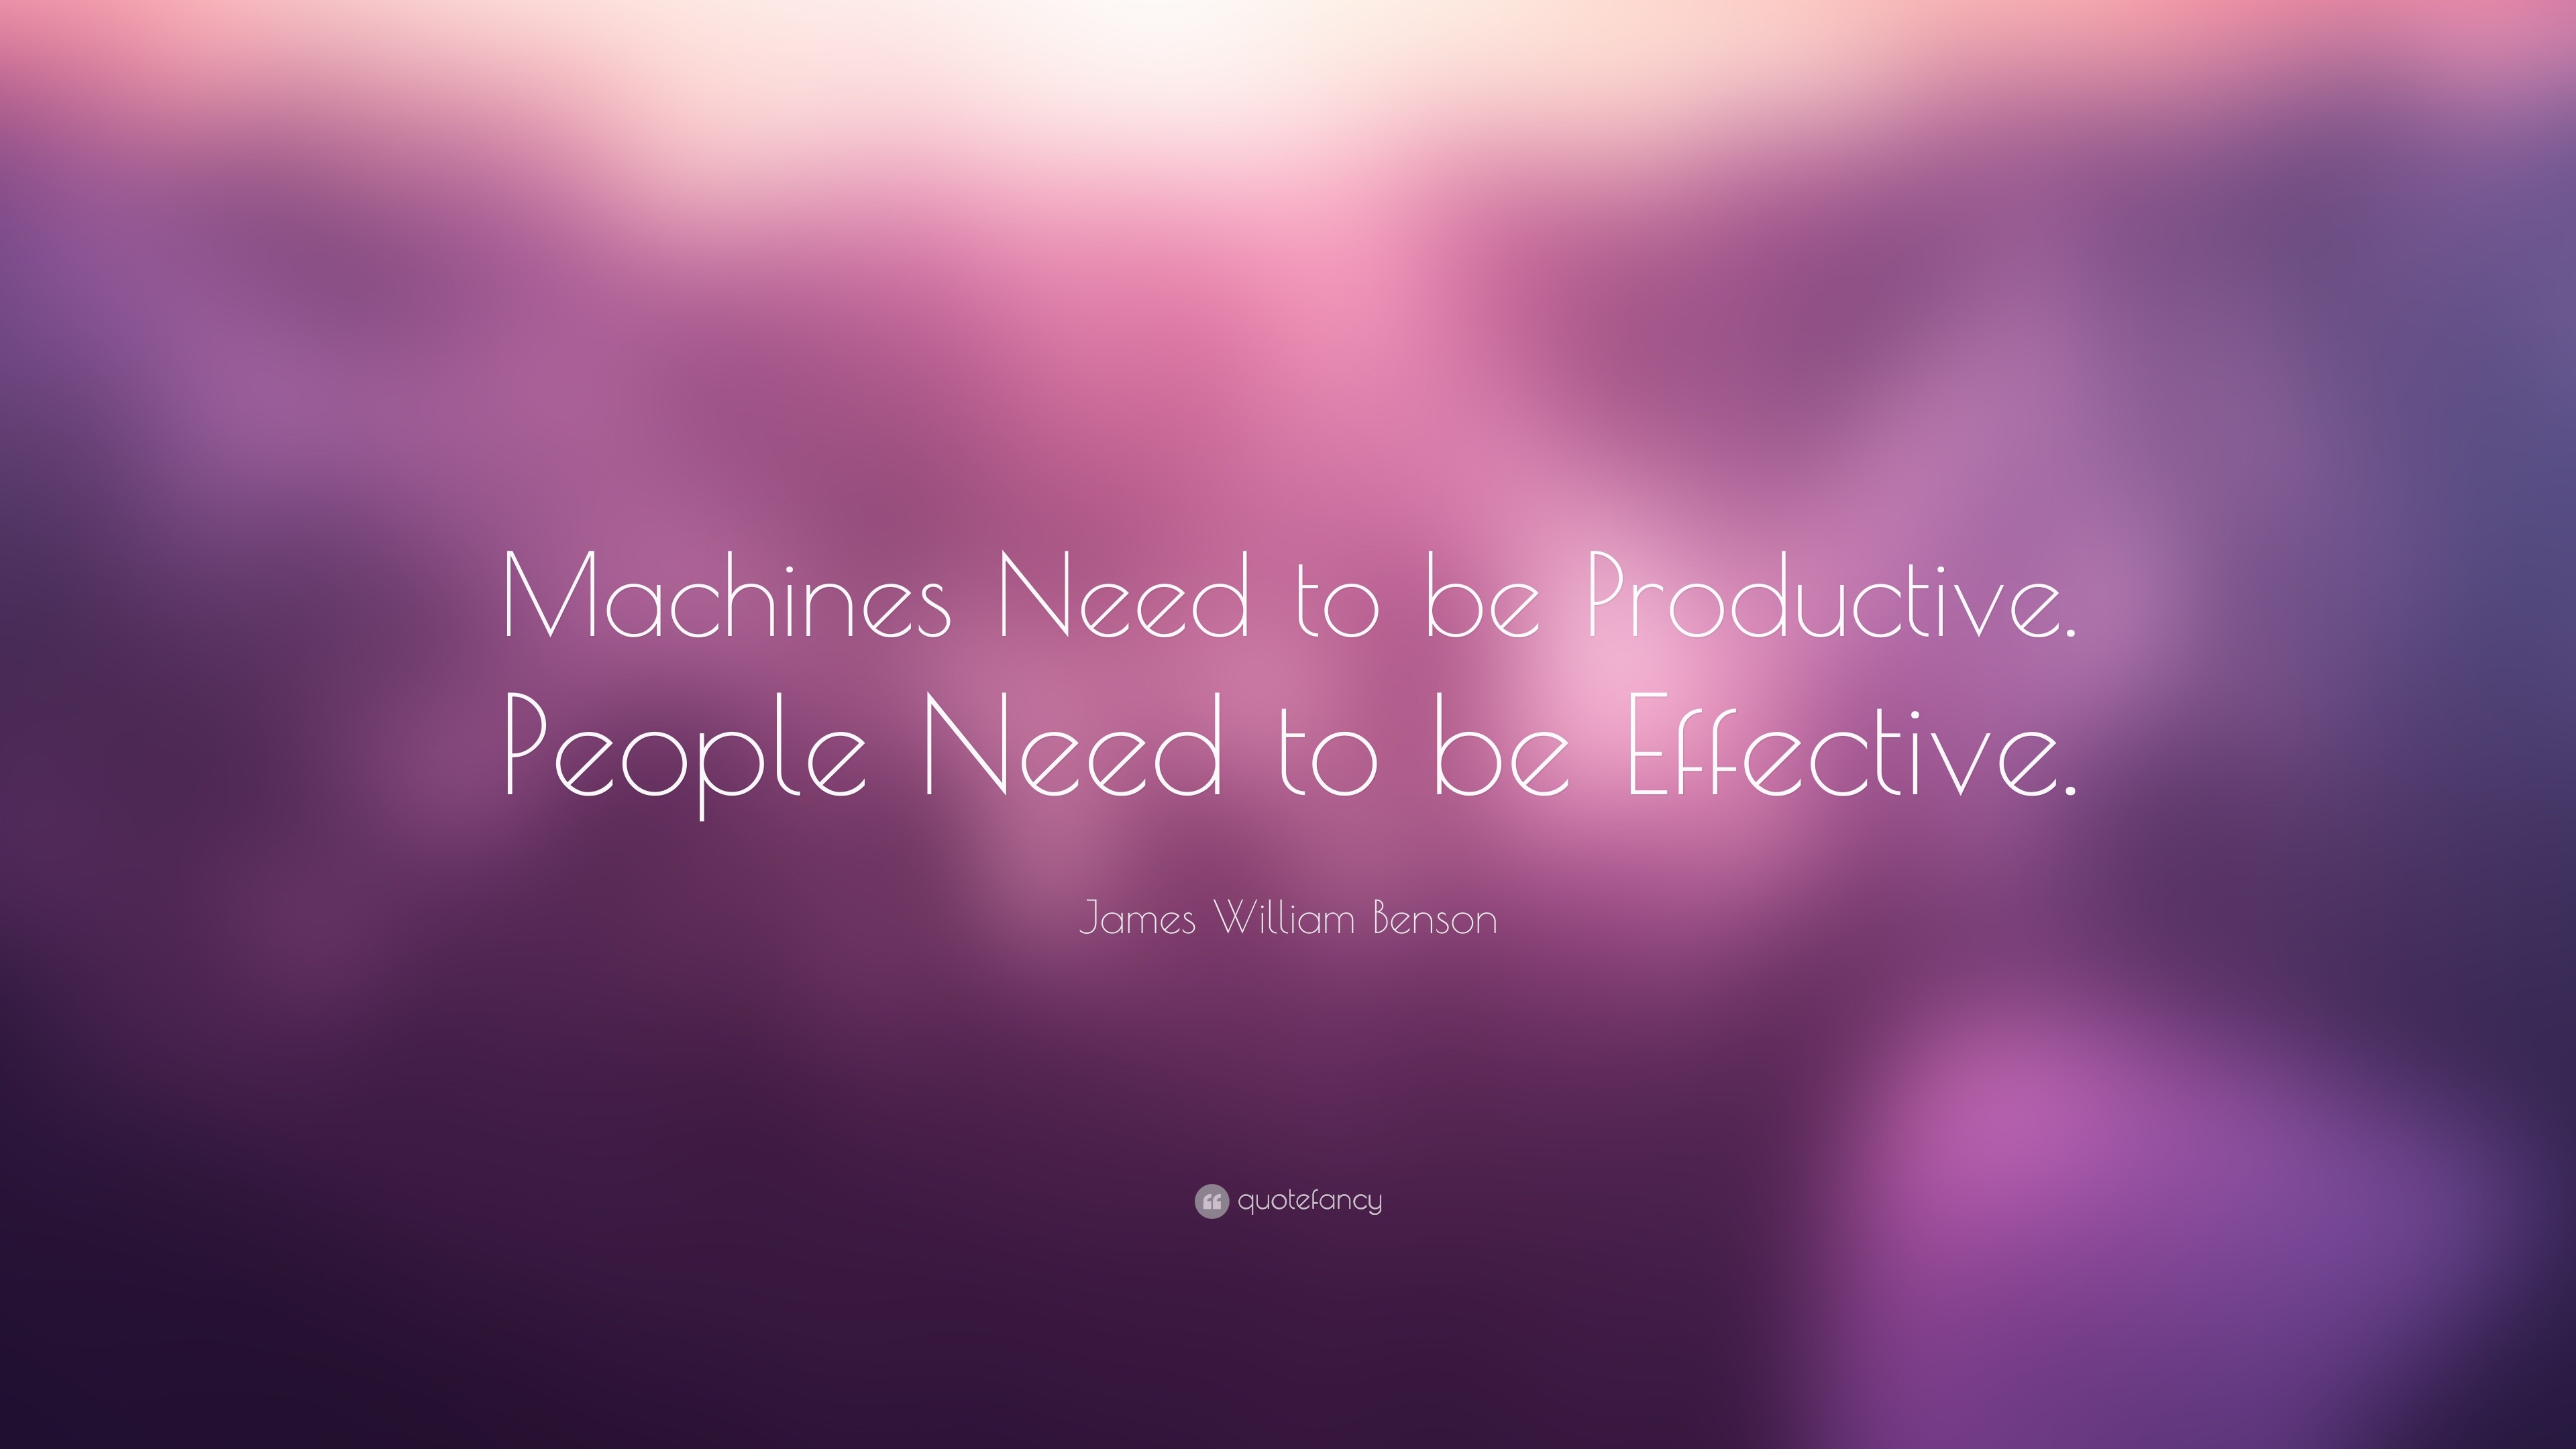 James William Benson Quote: “Machines Need to be Productive